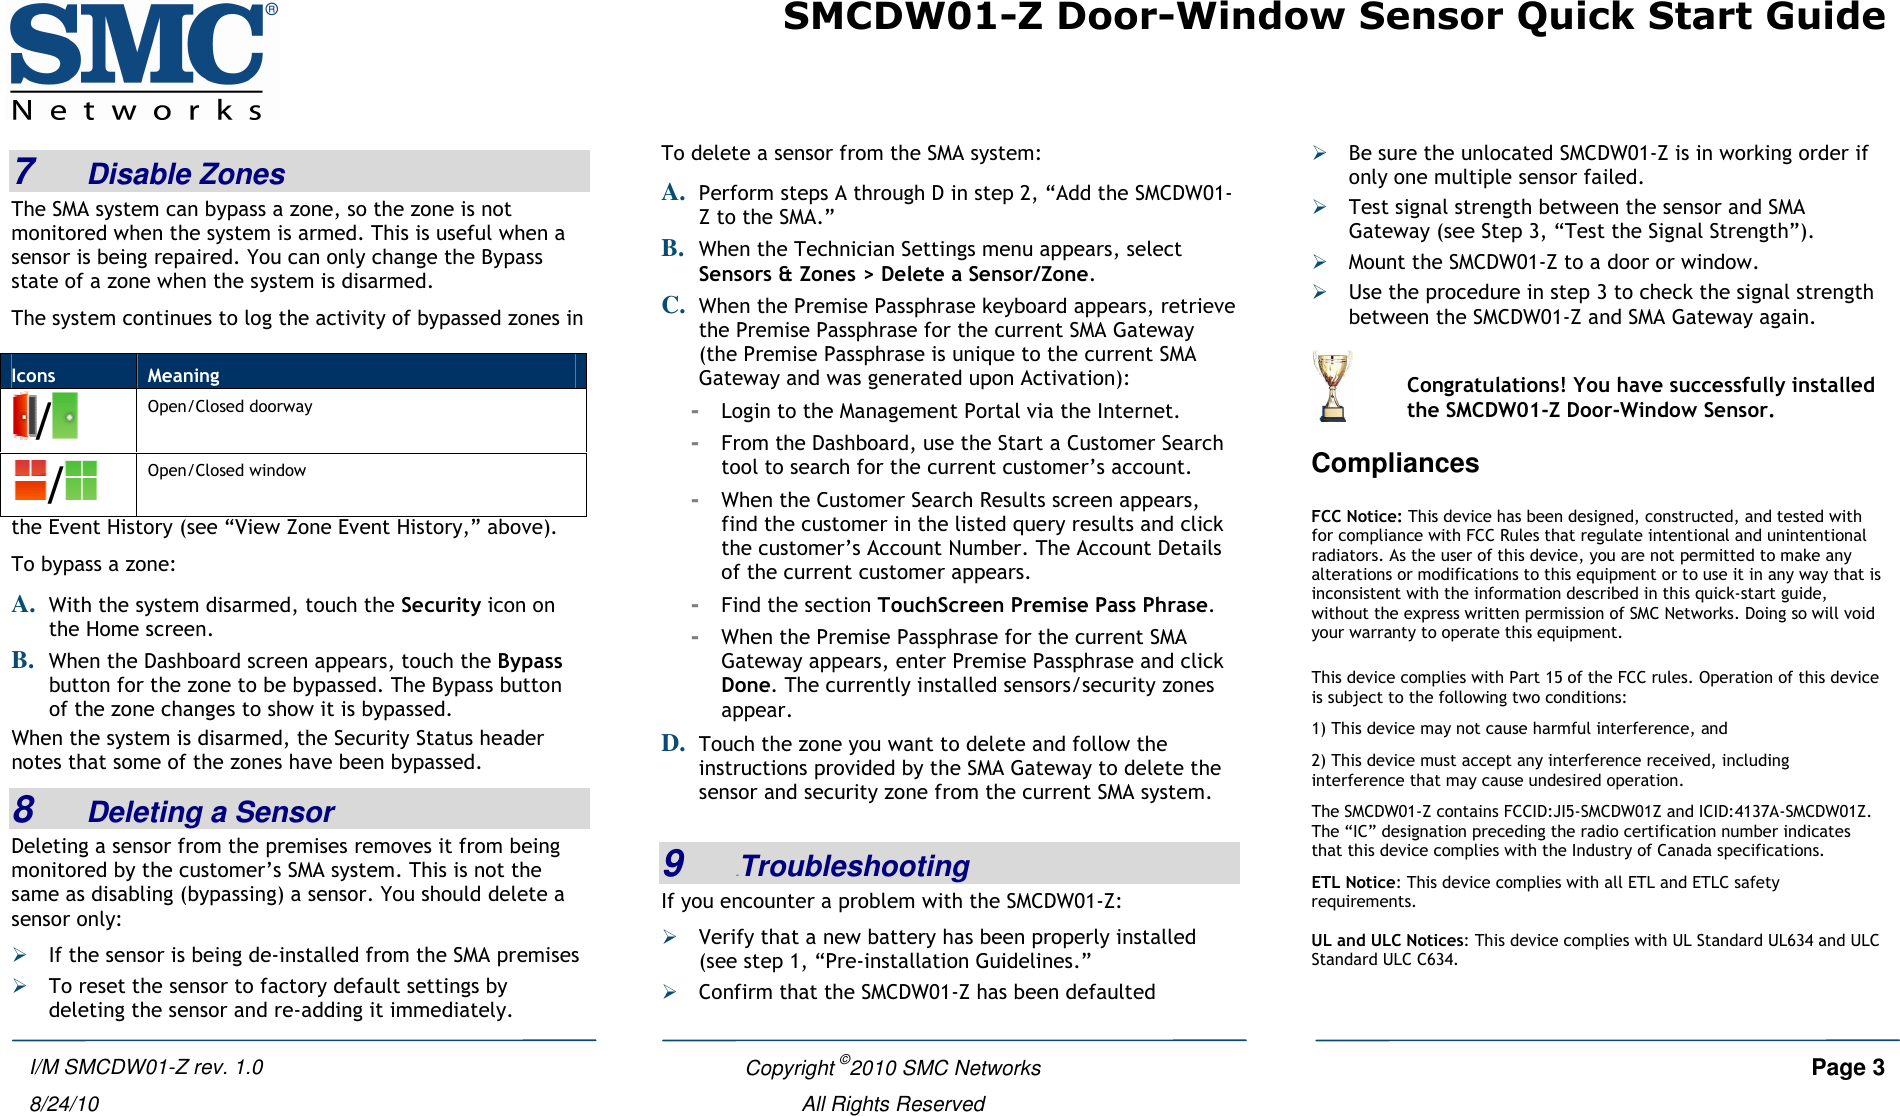 SMCDW01-Z Door-Window Sensor Quick Start Guide    Copyright ©2010 SMC Networks     Page 3  All Rights Reserved I/M SMCDW01-Z rev. 1.0 8/24/10 7   Disable Zones The SMA system can bypass a zone, so the zone is not monitored when the system is armed. This is useful when a sensor is being repaired. You can only change the Bypass state of a zone when the system is disarmed.  The system continues to log the activity of bypassed zones in the Event History (see “View Zone Event History,” above). To bypass a zone: A. With the system disarmed, touch the Security icon on the Home screen. B. When the Dashboard screen appears, touch the Bypass button for the zone to be bypassed. The Bypass button of the zone changes to show it is bypassed. When the system is disarmed, the Security Status header notes that some of the zones have been bypassed. 8   Deleting a Sensor Deleting a sensor from the premises removes it from being monitored by the customer’s SMA system. This is not the same as disabling (bypassing) a sensor. You should delete a sensor only:  If the sensor is being de-installed from the SMA premises   To reset the sensor to factory default settings by deleting the sensor and re-adding it immediately. To delete a sensor from the SMA system:  A. Perform steps A through D in step 2, “Add the SMCDW01-Z to the SMA.” B. When the Technician Settings menu appears, select Sensors &amp; Zones &gt; Delete a Sensor/Zone. C. When the Premise Passphrase keyboard appears, retrieve the Premise Passphrase for the current SMA Gateway (the Premise Passphrase is unique to the current SMA Gateway and was generated upon Activation): - Login to the Management Portal via the Internet. - From the Dashboard, use the Start a Customer Search tool to search for the current customer’s account. - When the Customer Search Results screen appears, find the customer in the listed query results and click the customer’s Account Number. The Account Details of the current customer appears. - Find the section TouchScreen Premise Pass Phrase. - When the Premise Passphrase for the current SMA Gateway appears, enter Premise Passphrase and click Done. The currently installed sensors/security zones appear.  D. Touch the zone you want to delete and follow the instructions provided by the SMA Gateway to delete the sensor and security zone from the current SMA system.  9   5BTroubleshooting If you encounter a problem with the SMCDW01-Z:  Verify that a new battery has been properly installed (see step 1, “Pre-installation Guidelines.”  Confirm that the SMCDW01-Z has been defaulted  Be sure the unlocated SMCDW01-Z is in working order if only one multiple sensor failed.  Test signal strength between the sensor and SMA Gateway (see Step 3, “Test the Signal Strength”).  Mount the SMCDW01-Z to a door or window.  Use the procedure in step 3 to check the signal strength between the SMCDW01-Z and SMA Gateway again. Compliances  FCC Notice: This device has been designed, constructed, and tested with for compliance with FCC Rules that regulate intentional and unintentional radiators. As the user of this device, you are not permitted to make any alterations or modifications to this equipment or to use it in any way that is inconsistent with the information described in this quick-start guide, without the express written permission of SMC Networks. Doing so will void your warranty to operate this equipment.  This device complies with Part 15 of the FCC rules. Operation of this device is subject to the following two conditions:  1) This device may not cause harmful interference, and  2) This device must accept any interference received, including interference that may cause undesired operation. The SMCDW01-Z contains FCCID:JI5-SMCDW01Z and ICID:4137A-SMCDW01Z. The “IC” designation preceding the radio certification number indicates that this device complies with the Industry of Canada specifications. ETL Notice: This device complies with all ETL and ETLC safety requirements.  UL and ULC Notices: This device complies with UL Standard UL634 and ULC Standard ULC C634. Icons  Meaning / Open/Closed doorway / Open/Closed window   Congratulations! You have successfully installed the SMCDW01-Z Door-Window Sensor. 